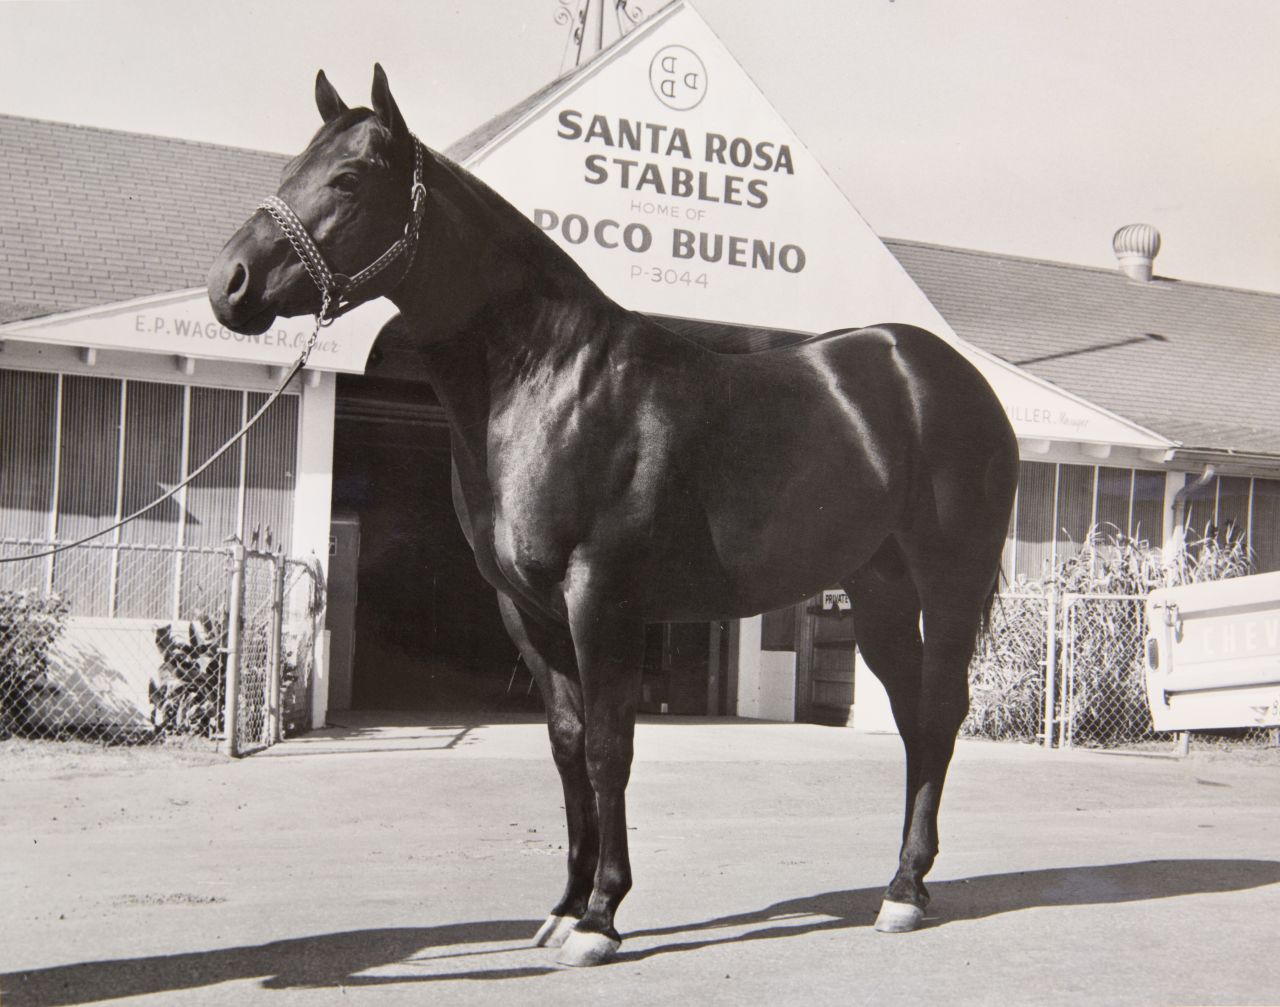 Even the animals are famous. Esteemed shire horse Poco Bueno, the first horse insured for $100,000, worked there and was buried standing fully upright at the behest of the Waggoner family.